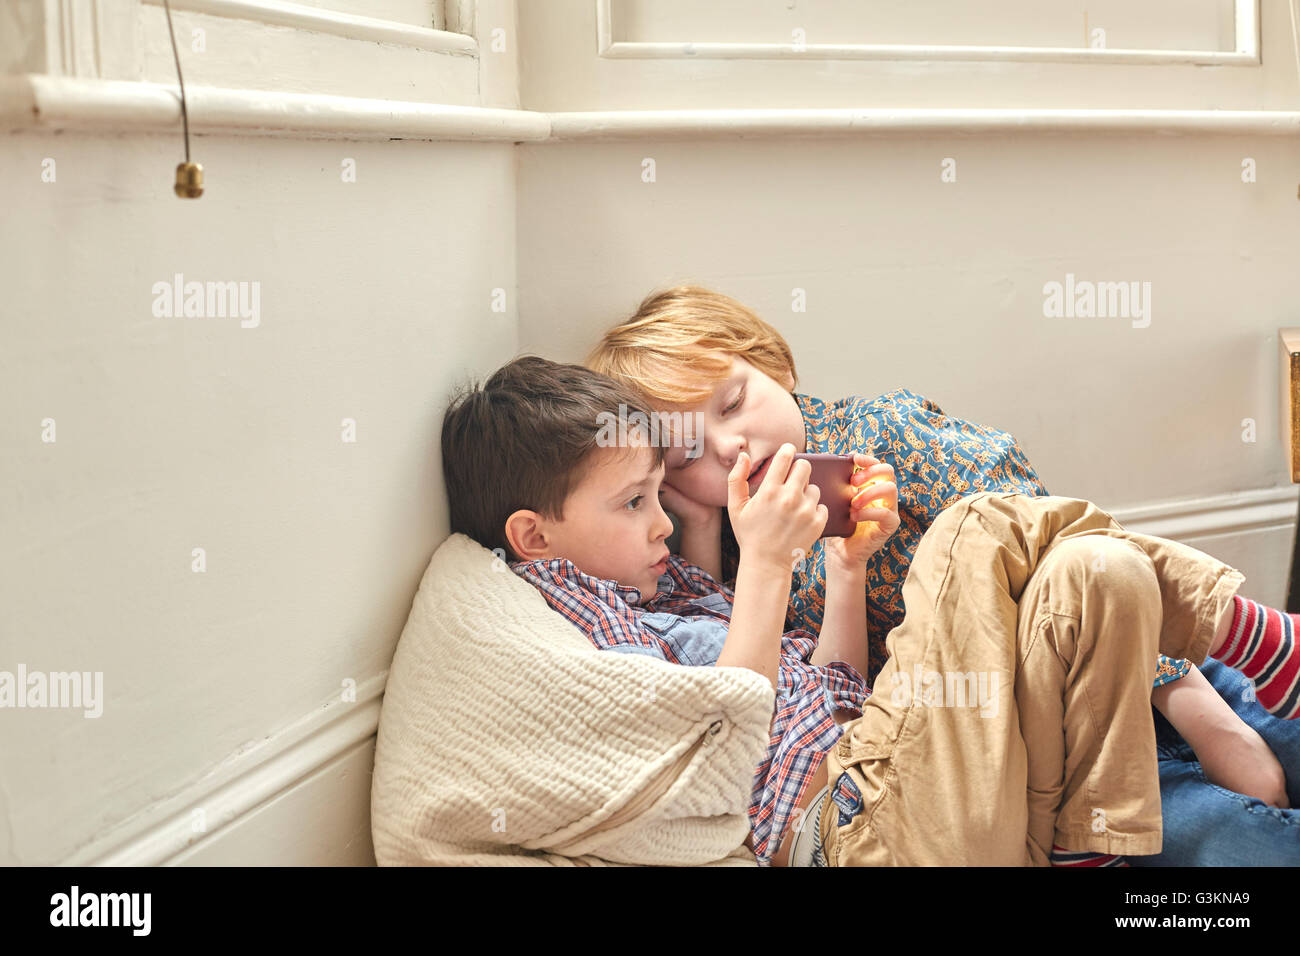 Two young boys leaning, sitting indoors, against wall, looking at smartphone Stock Photo